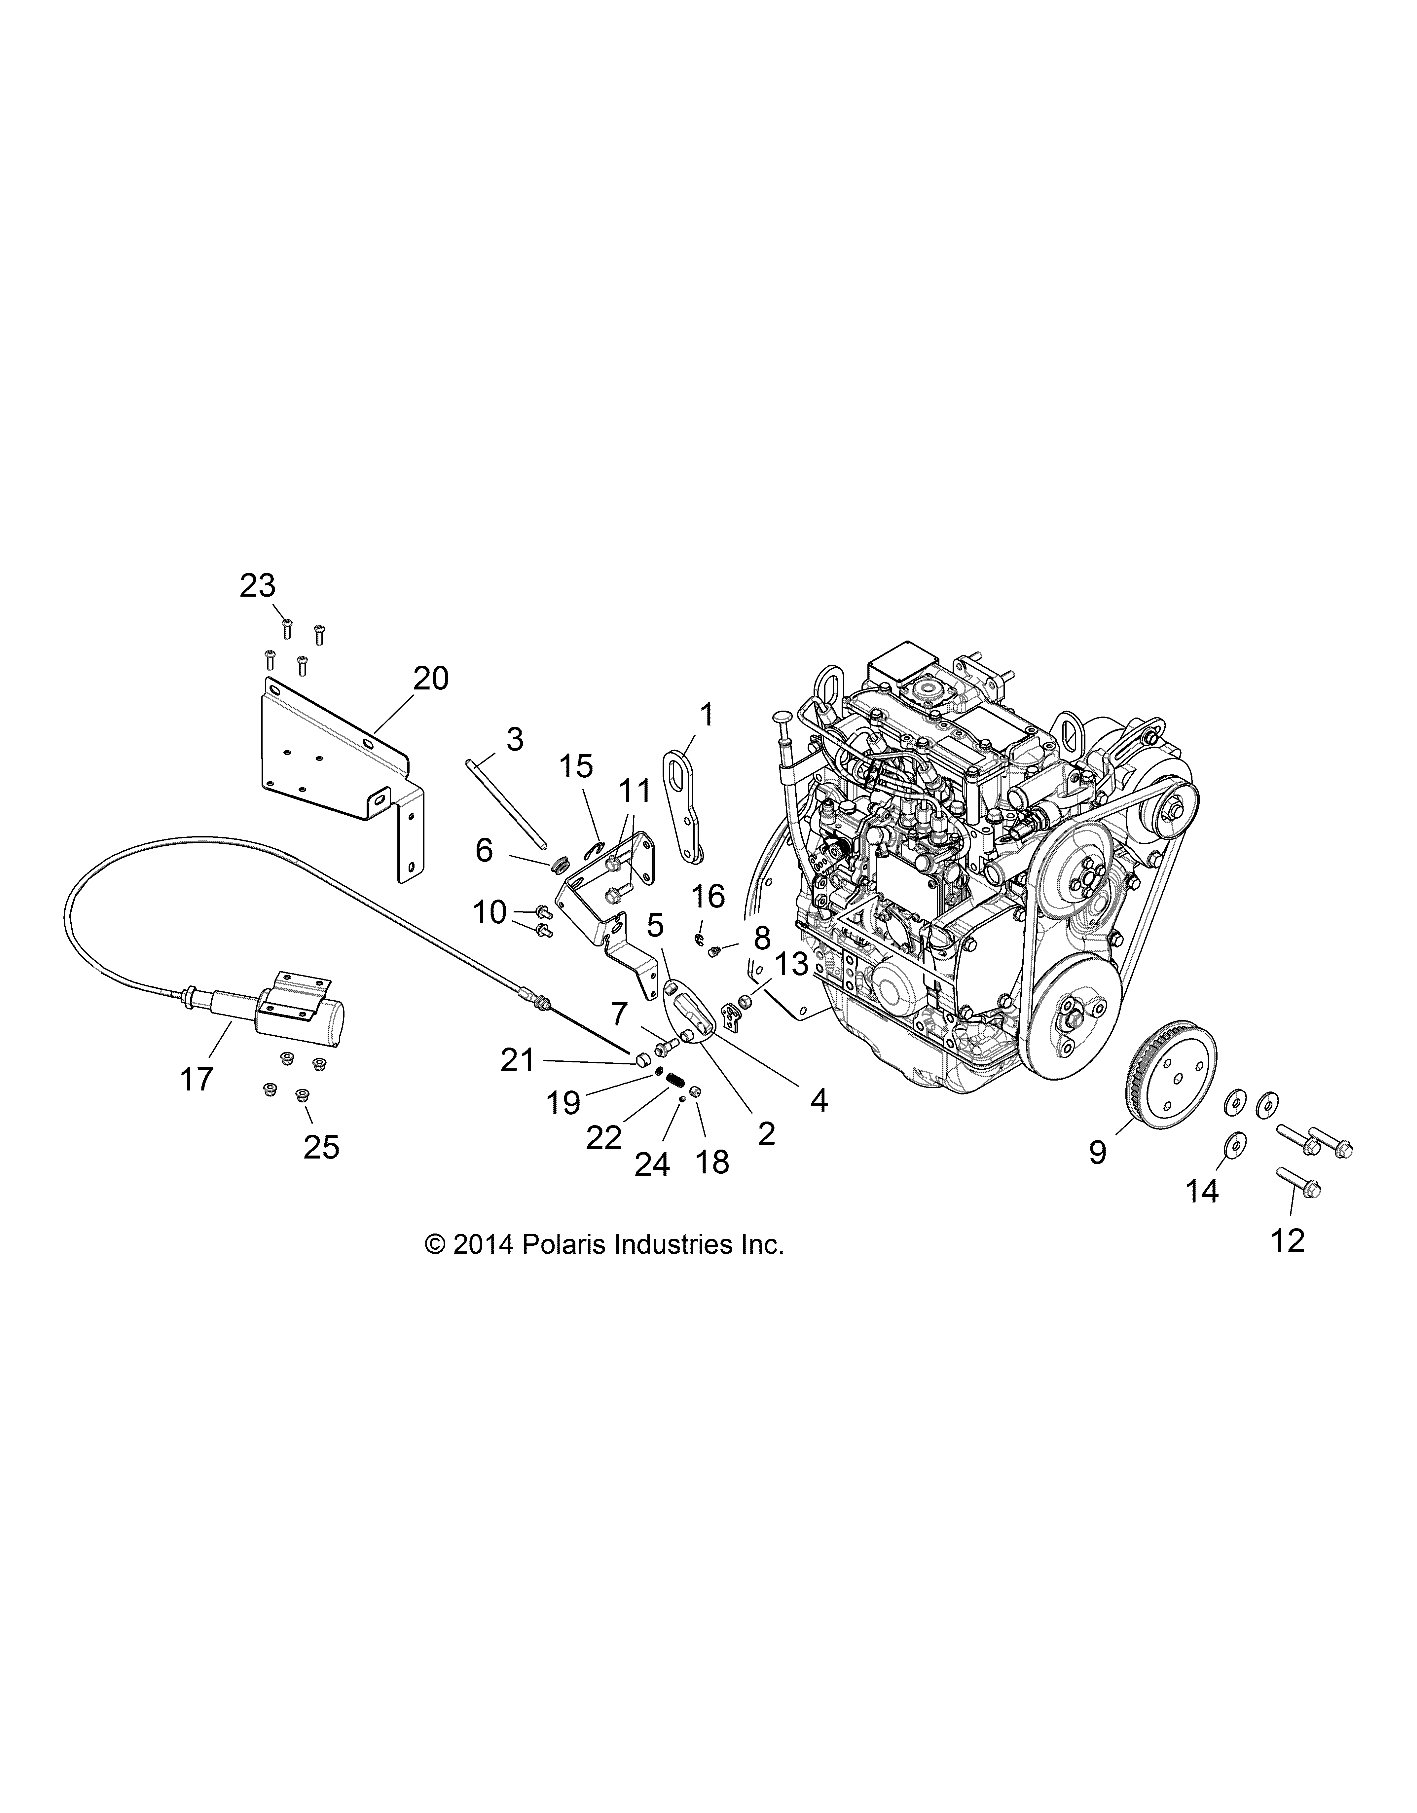 Part Number : 4014291 ASM-ACTUATOR THROTTLE HIGHIDLE